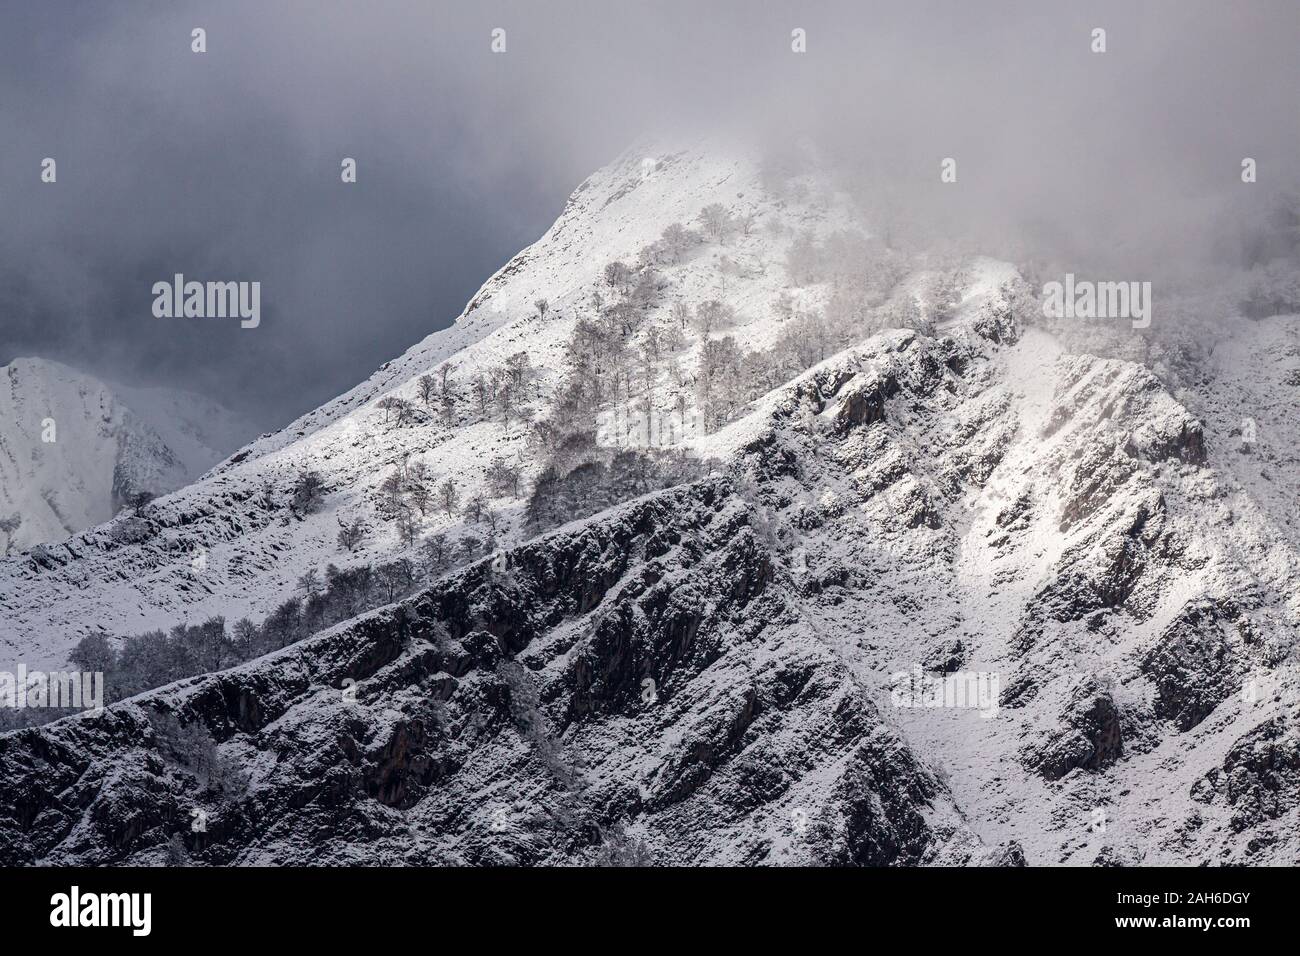 Snowy mountains in northern spain Stock Photo